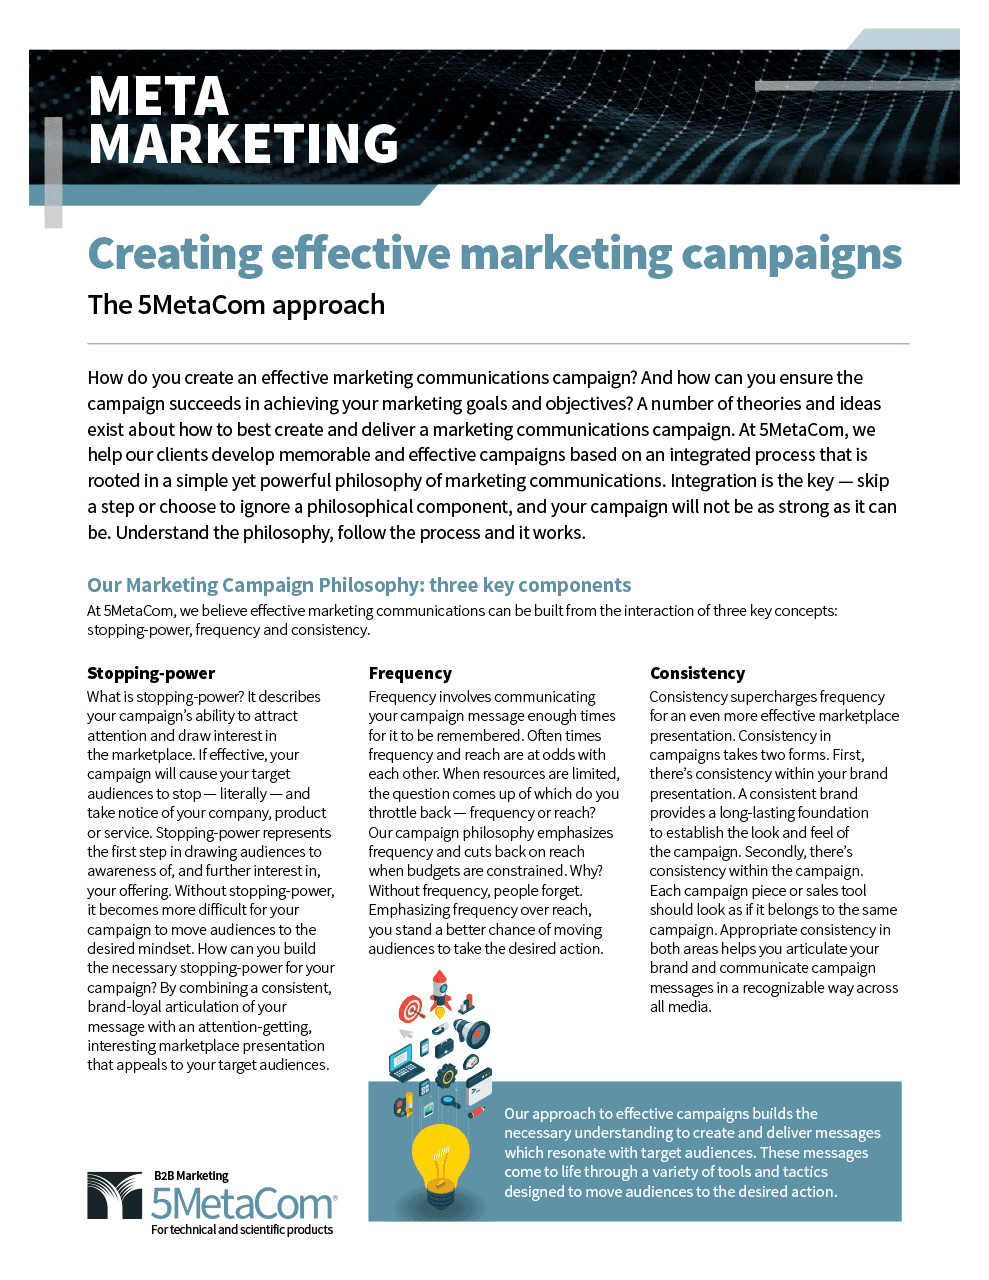 Creating Effective Marketing Campaigns